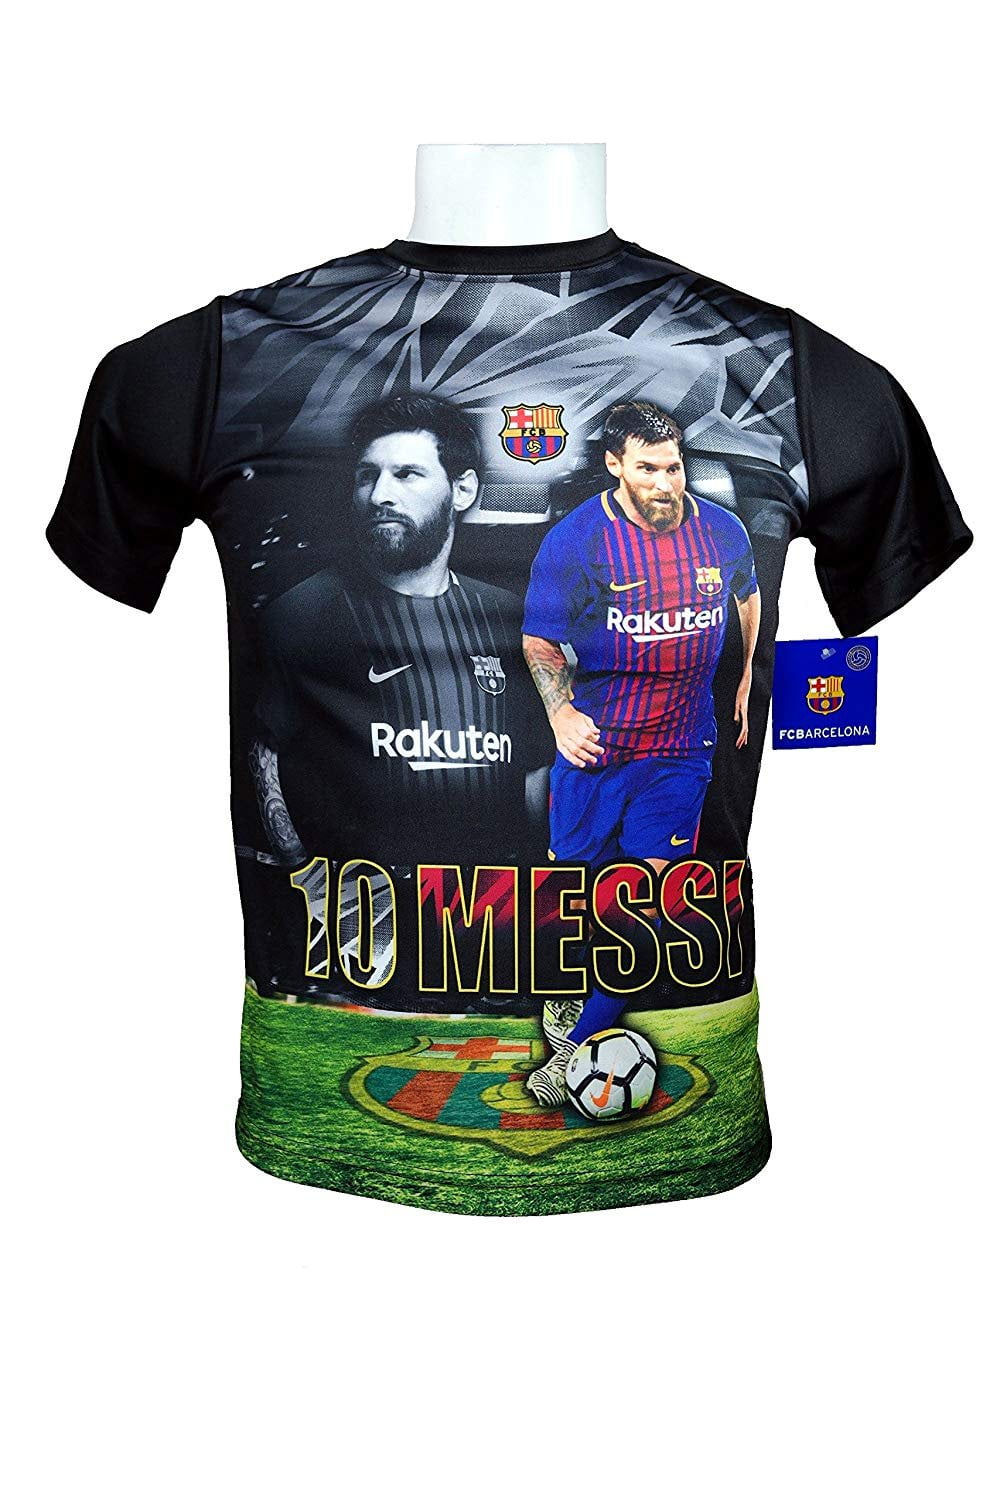 Fc Barcelona Messi 10 Jersey Official Licensed Youth Size Color Blue 